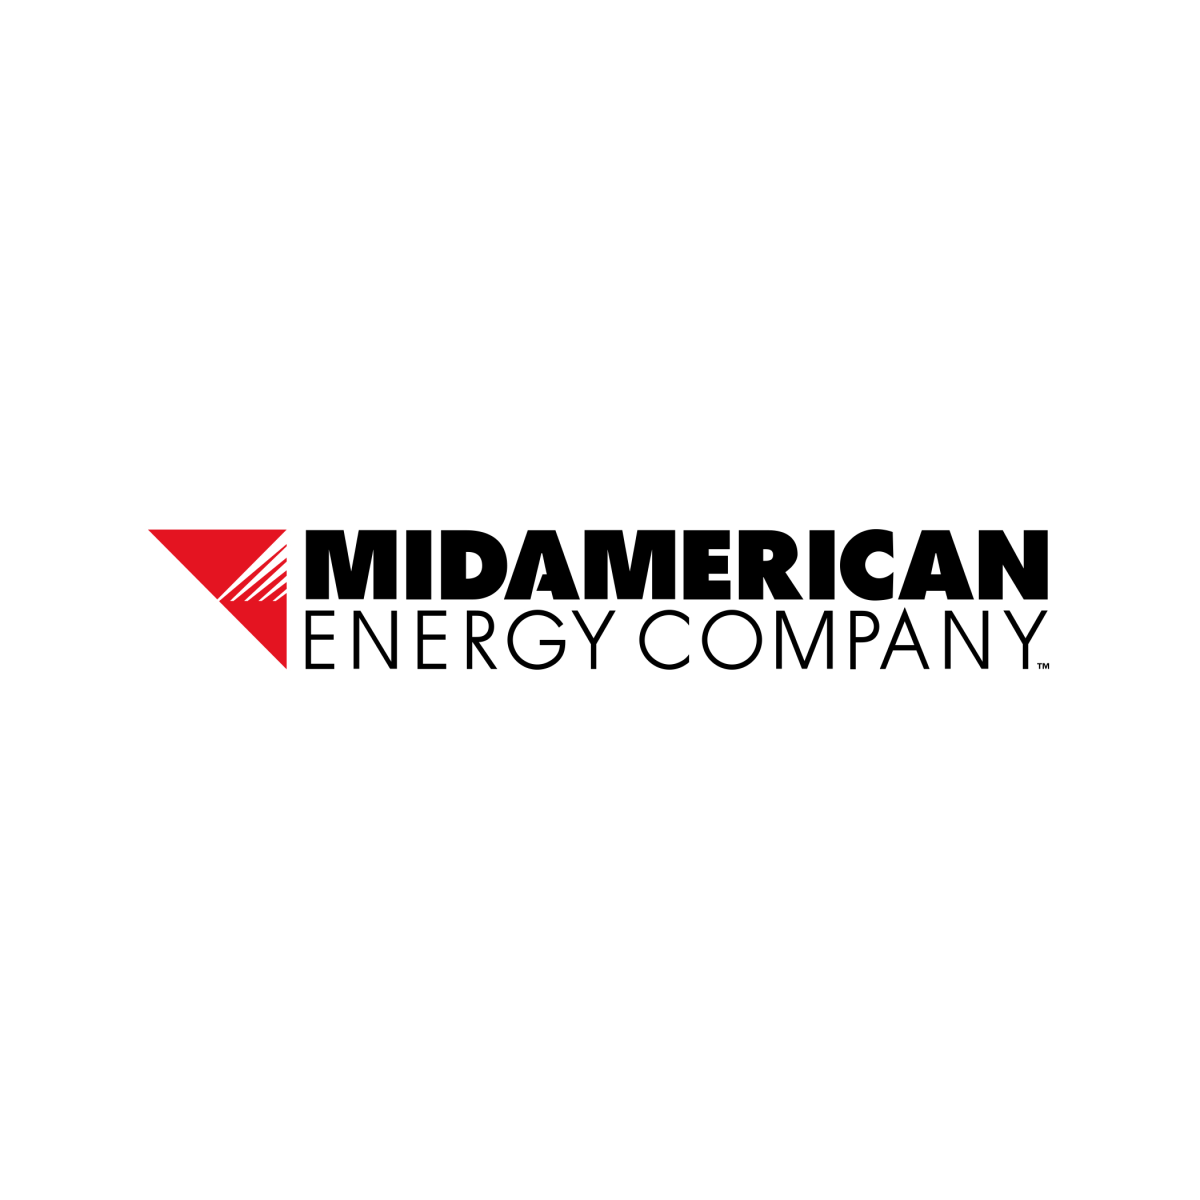 midamerican-energy-reaping-the-wind-news-sports-jobs-messenger-news